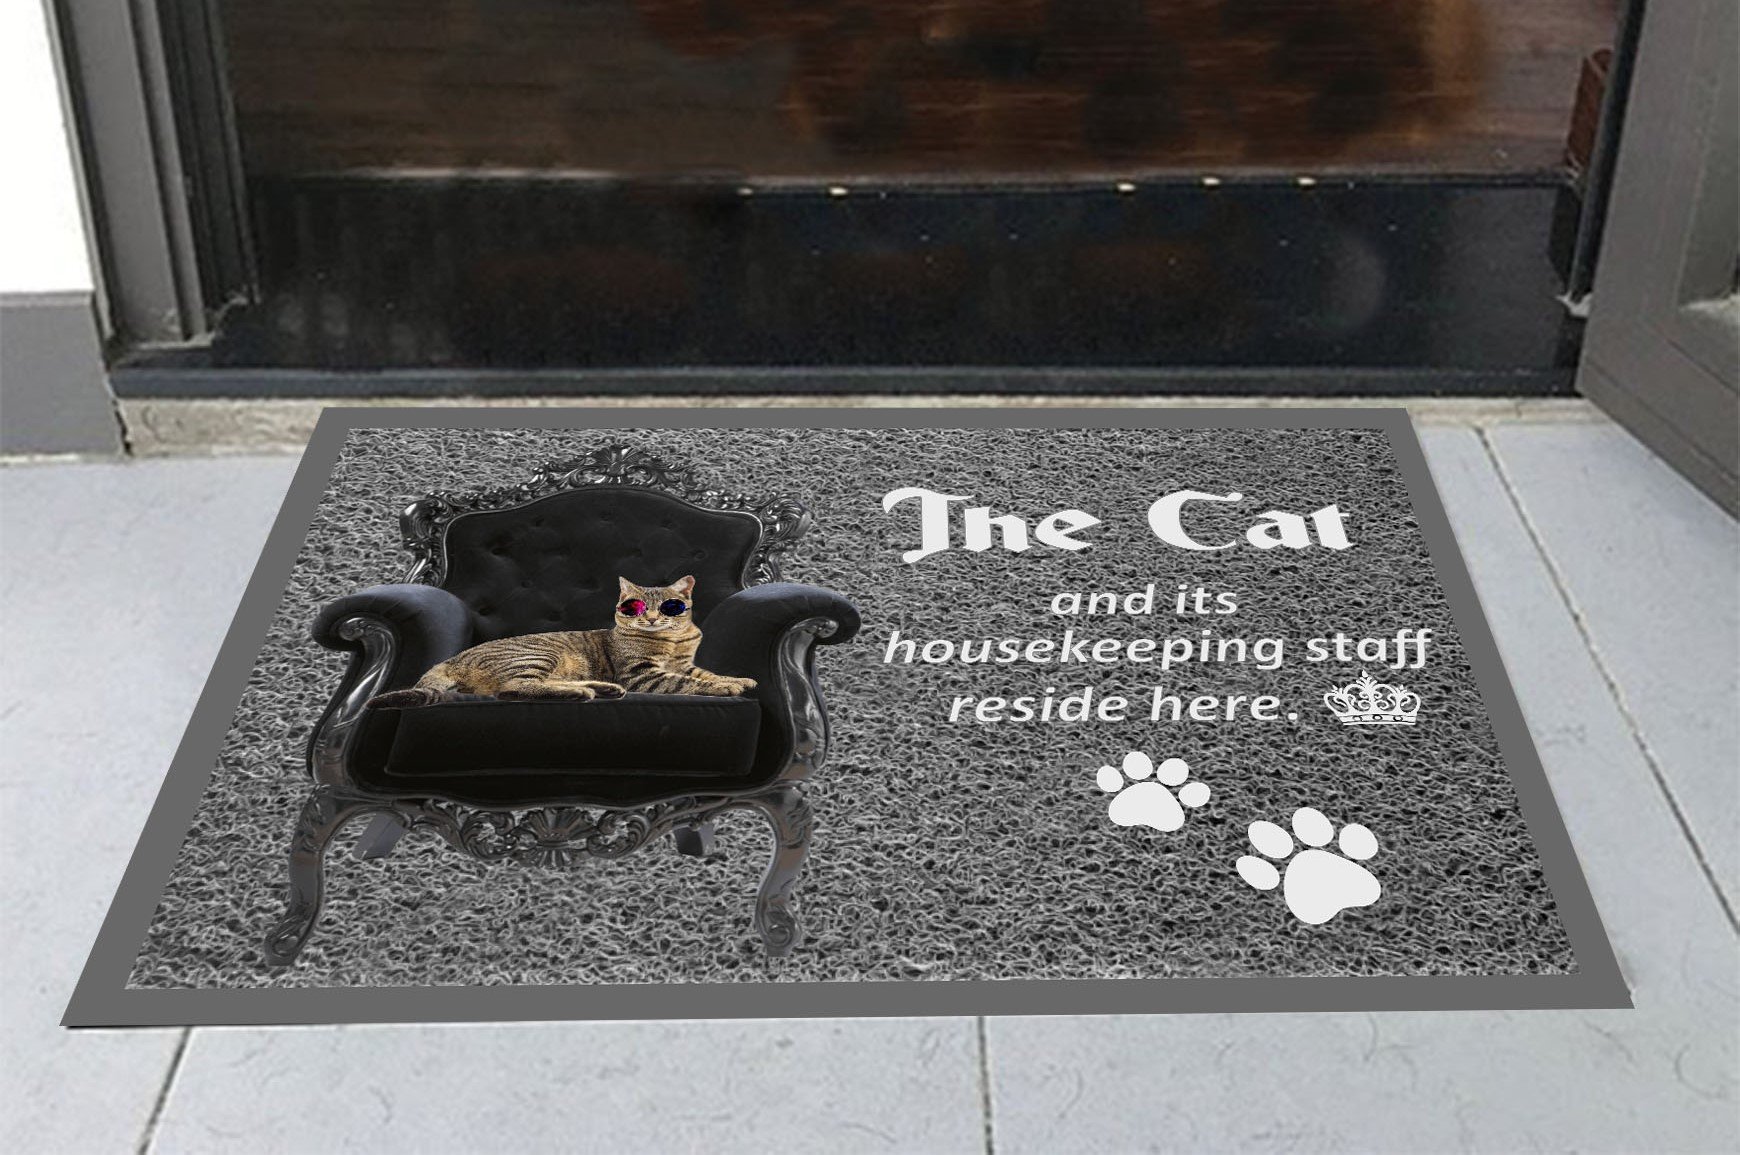 The cat and its housekeeping staff reside here doormat